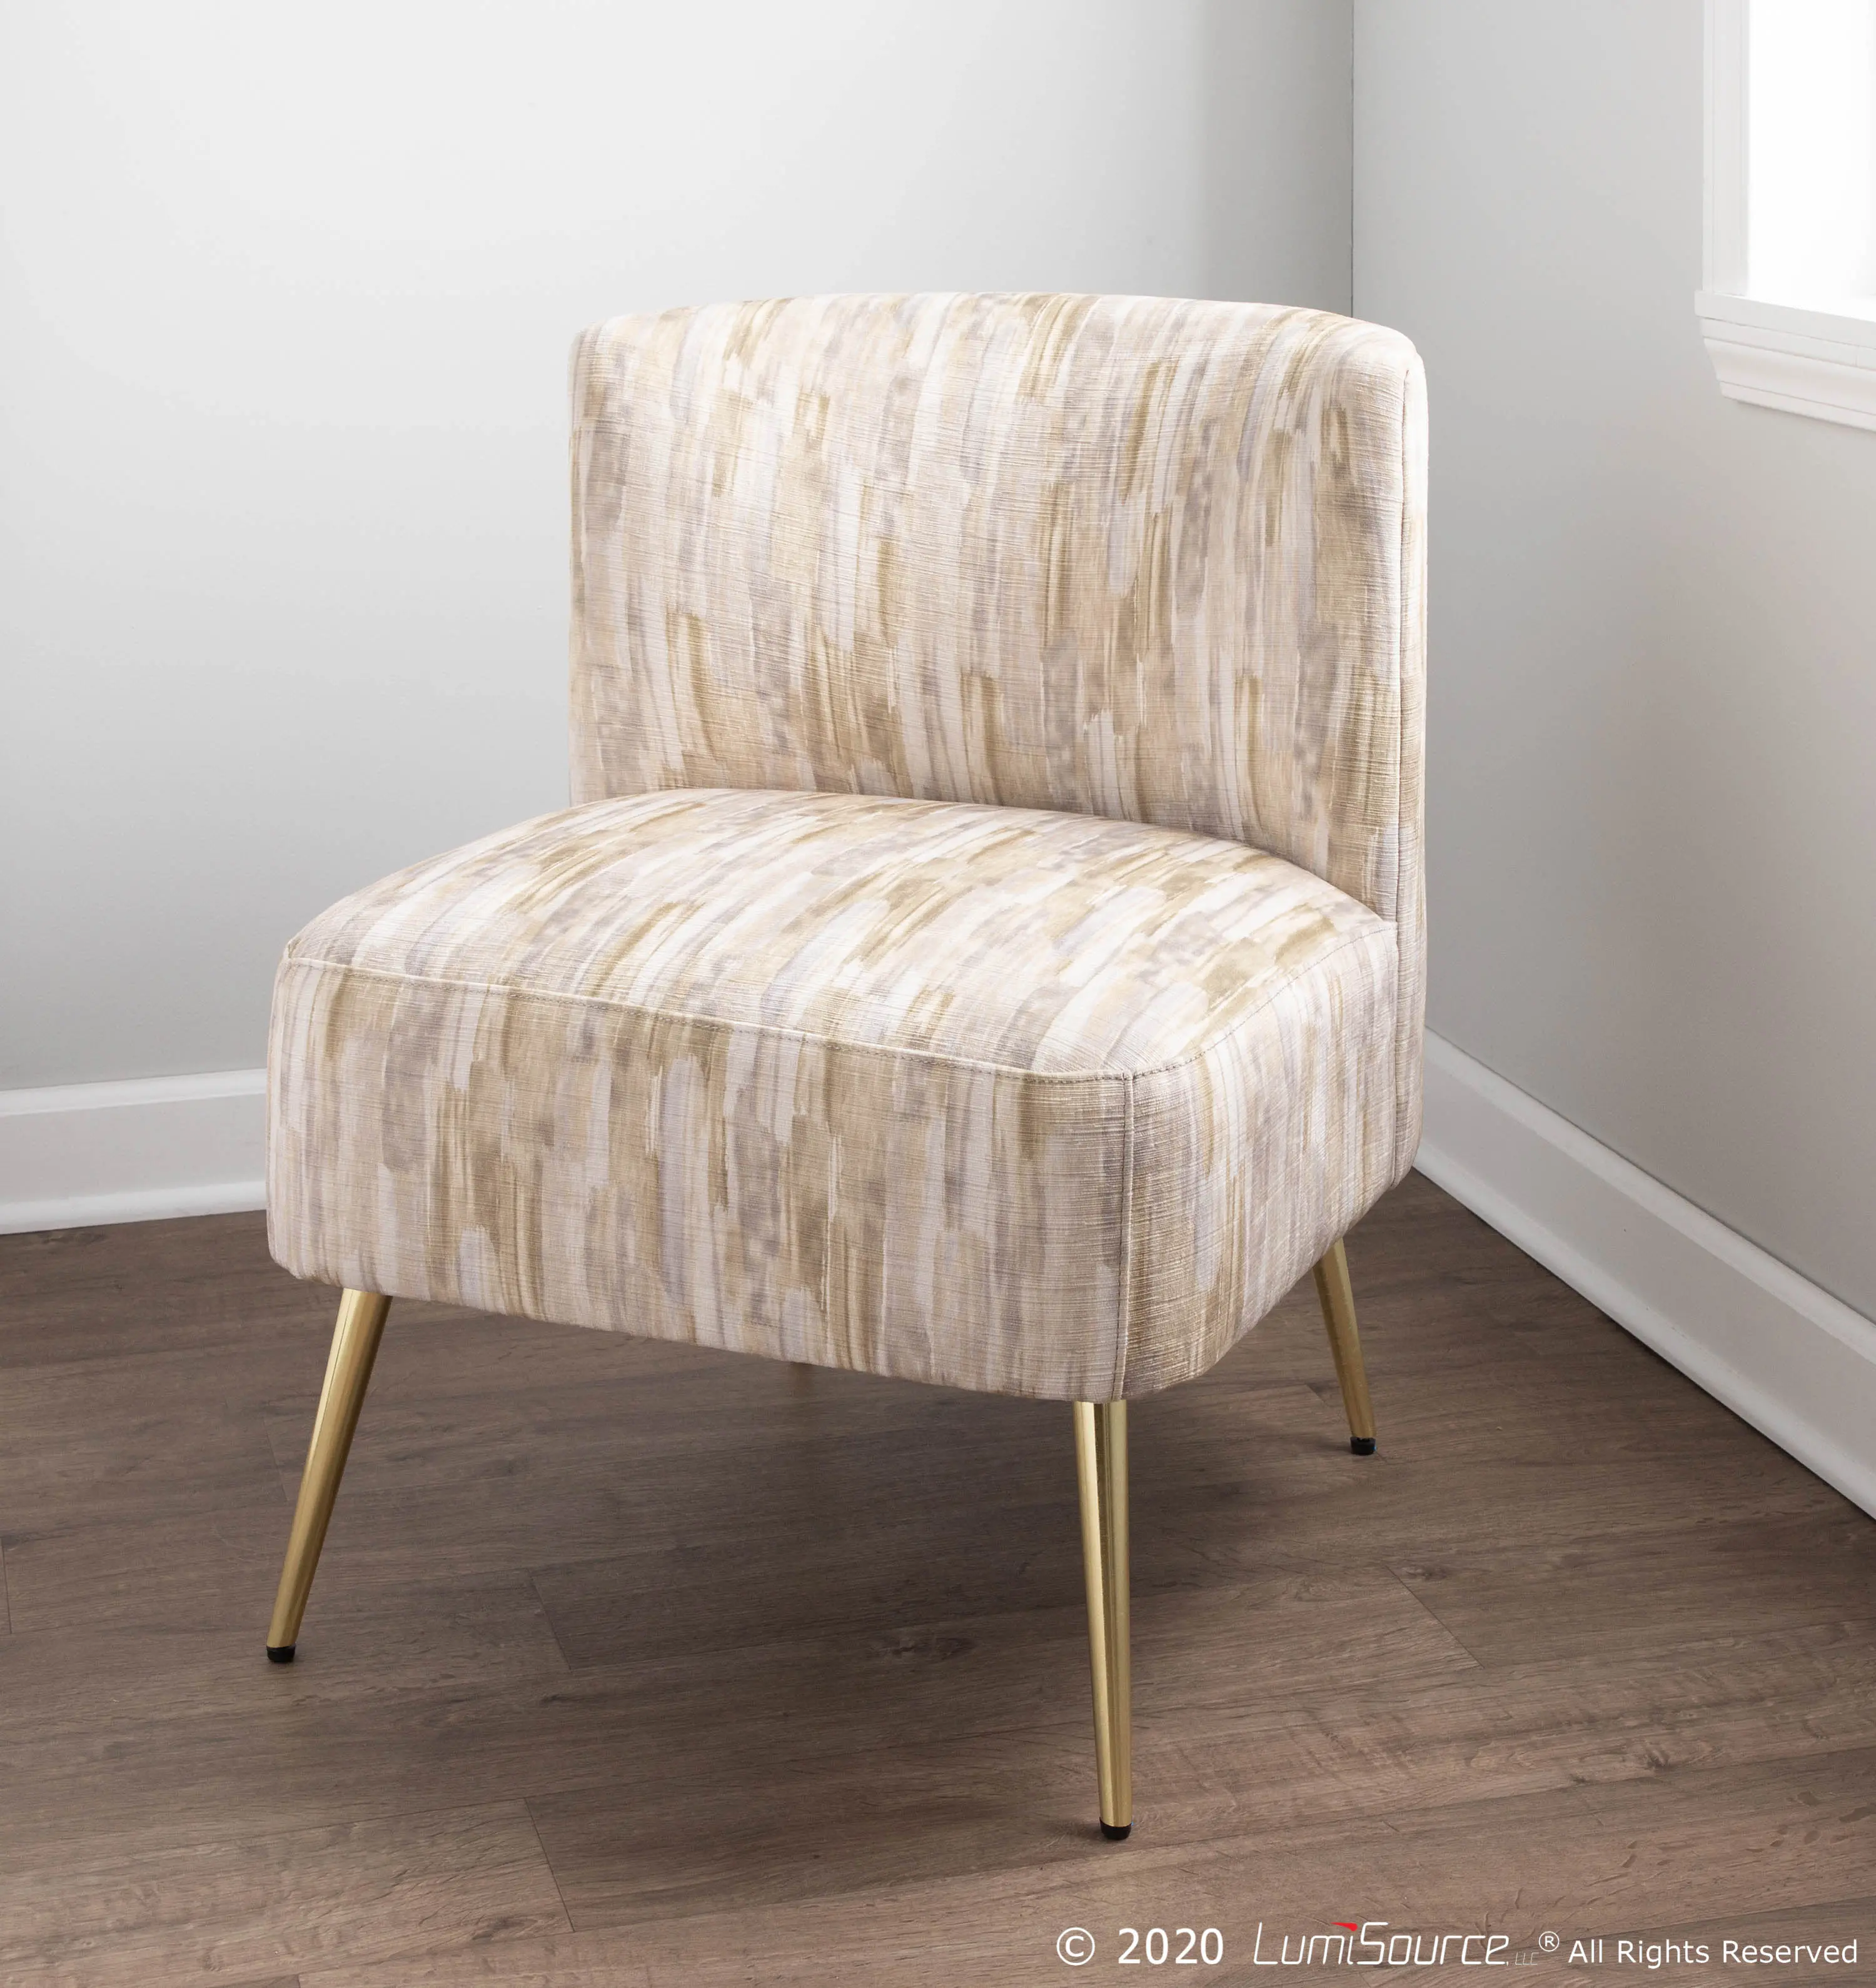 Contemporary Light Brown Slipper Chair with Gold Legs - Luna